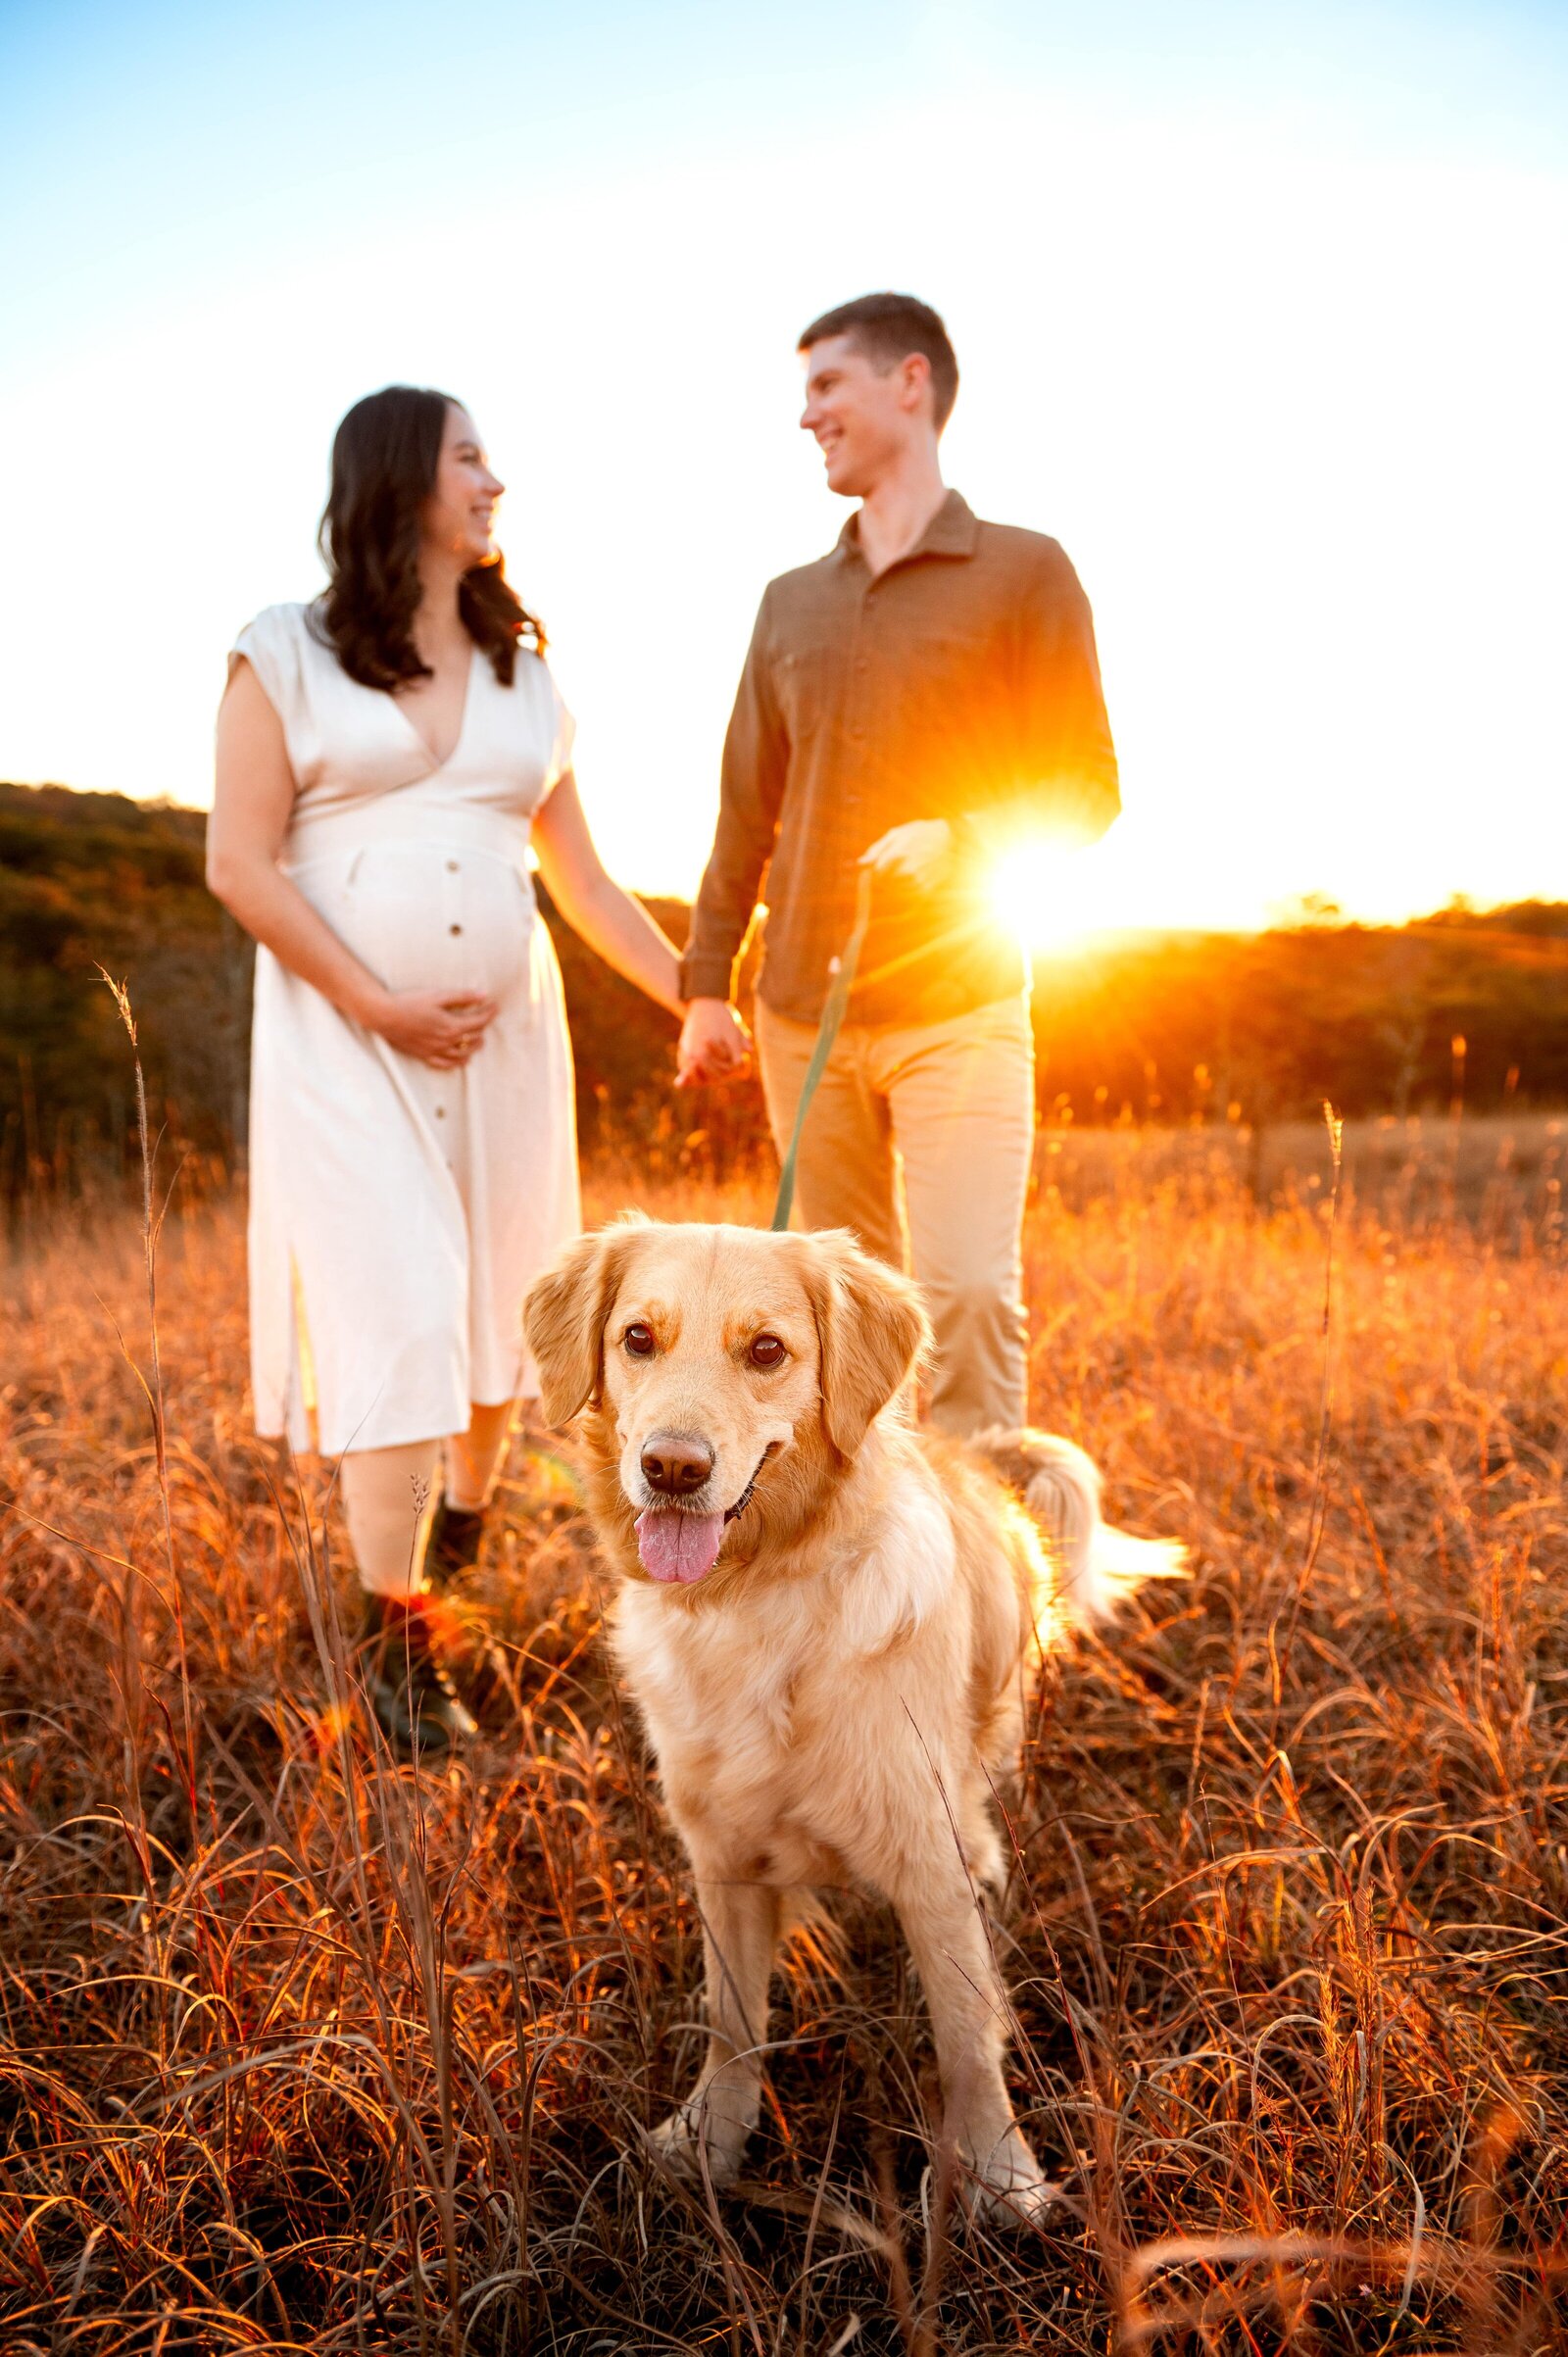 Pregnant wife and husband walking their dog in a tall grassy field